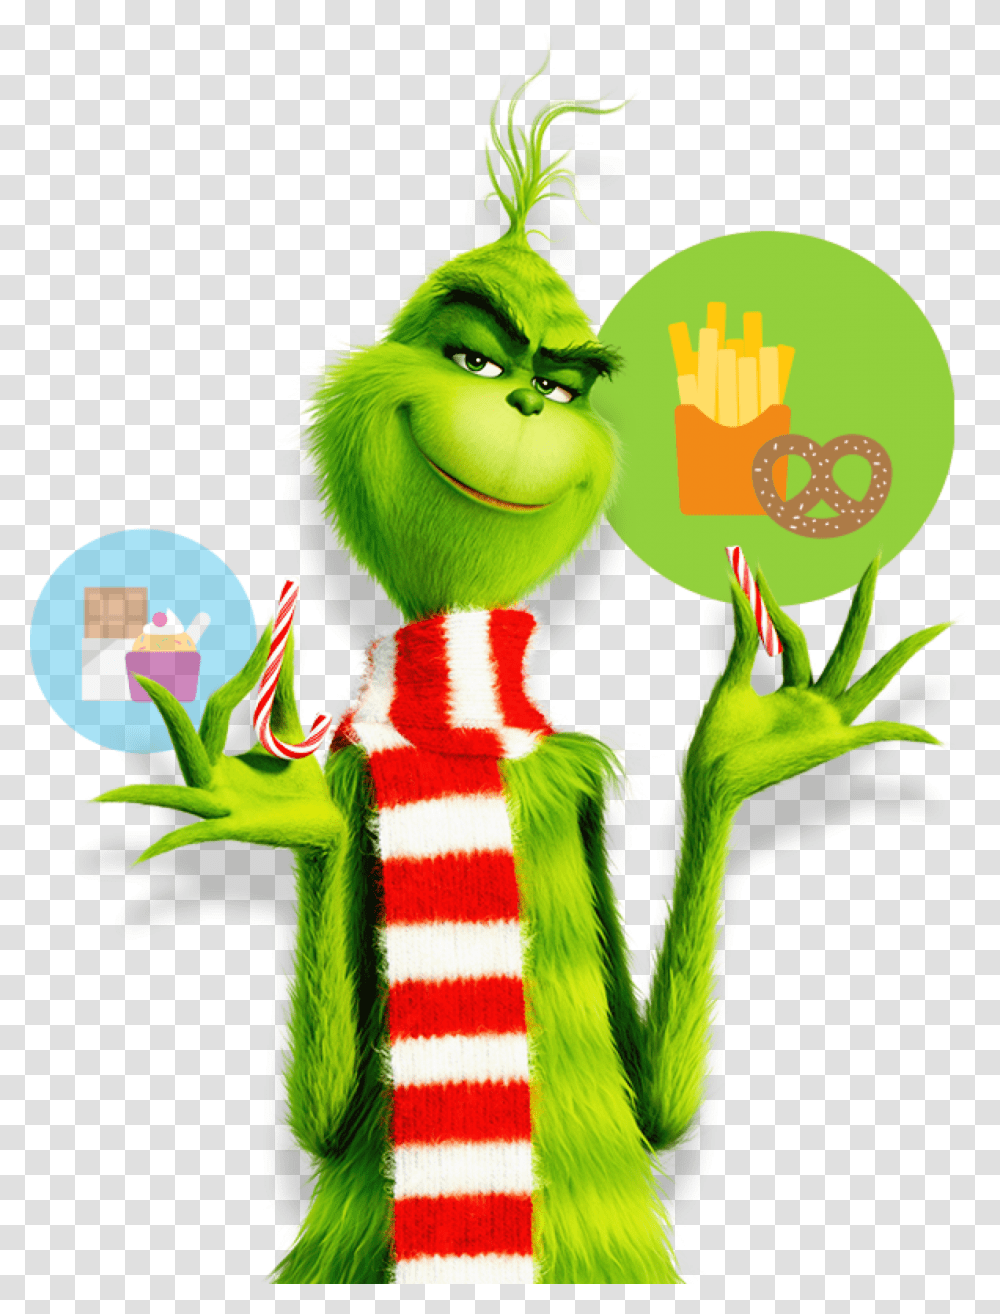 The Grinch Breaks A Sweet Candy Cane Grinch Breaking Candy Cane, Bird, Plant Transparent Png